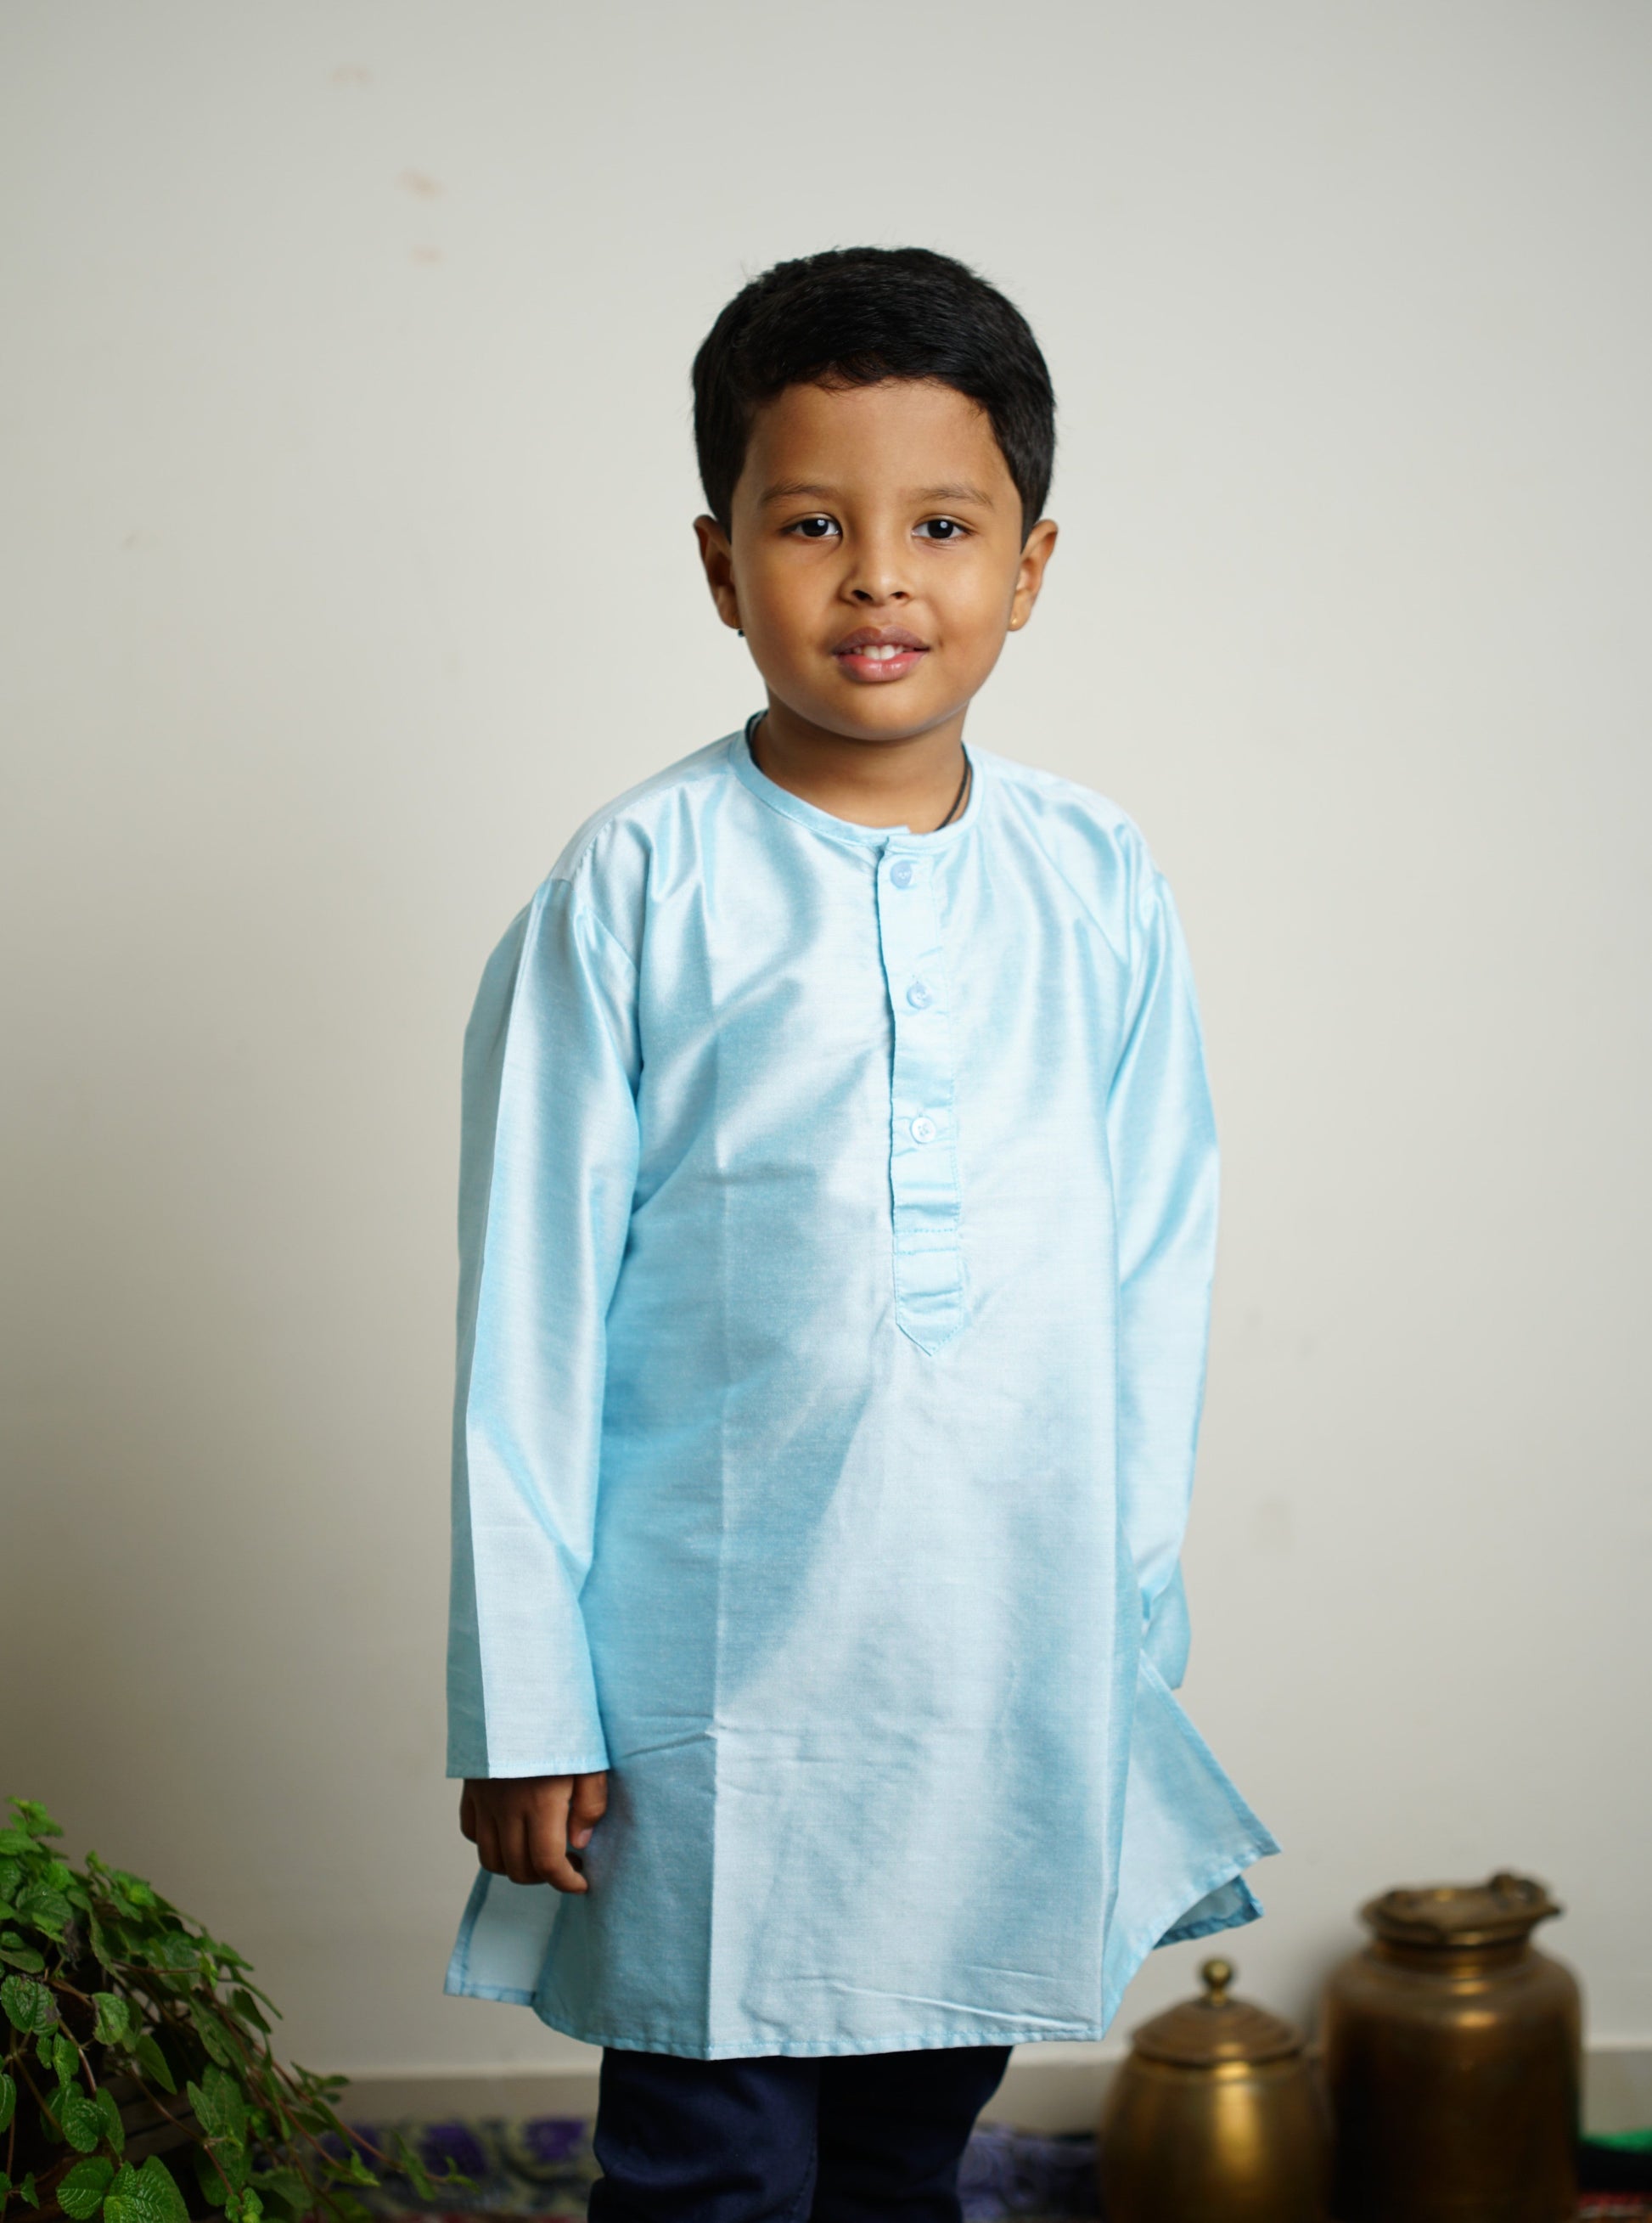 Light Sky Blue cotton silk Round neck long kurta with wooden buttons.Kurtas with collar or Angarakha pattern teamed with salwar are the best choice for any festive occasion for boys.They are Trendy, Easy to wear and comfortable to carry.